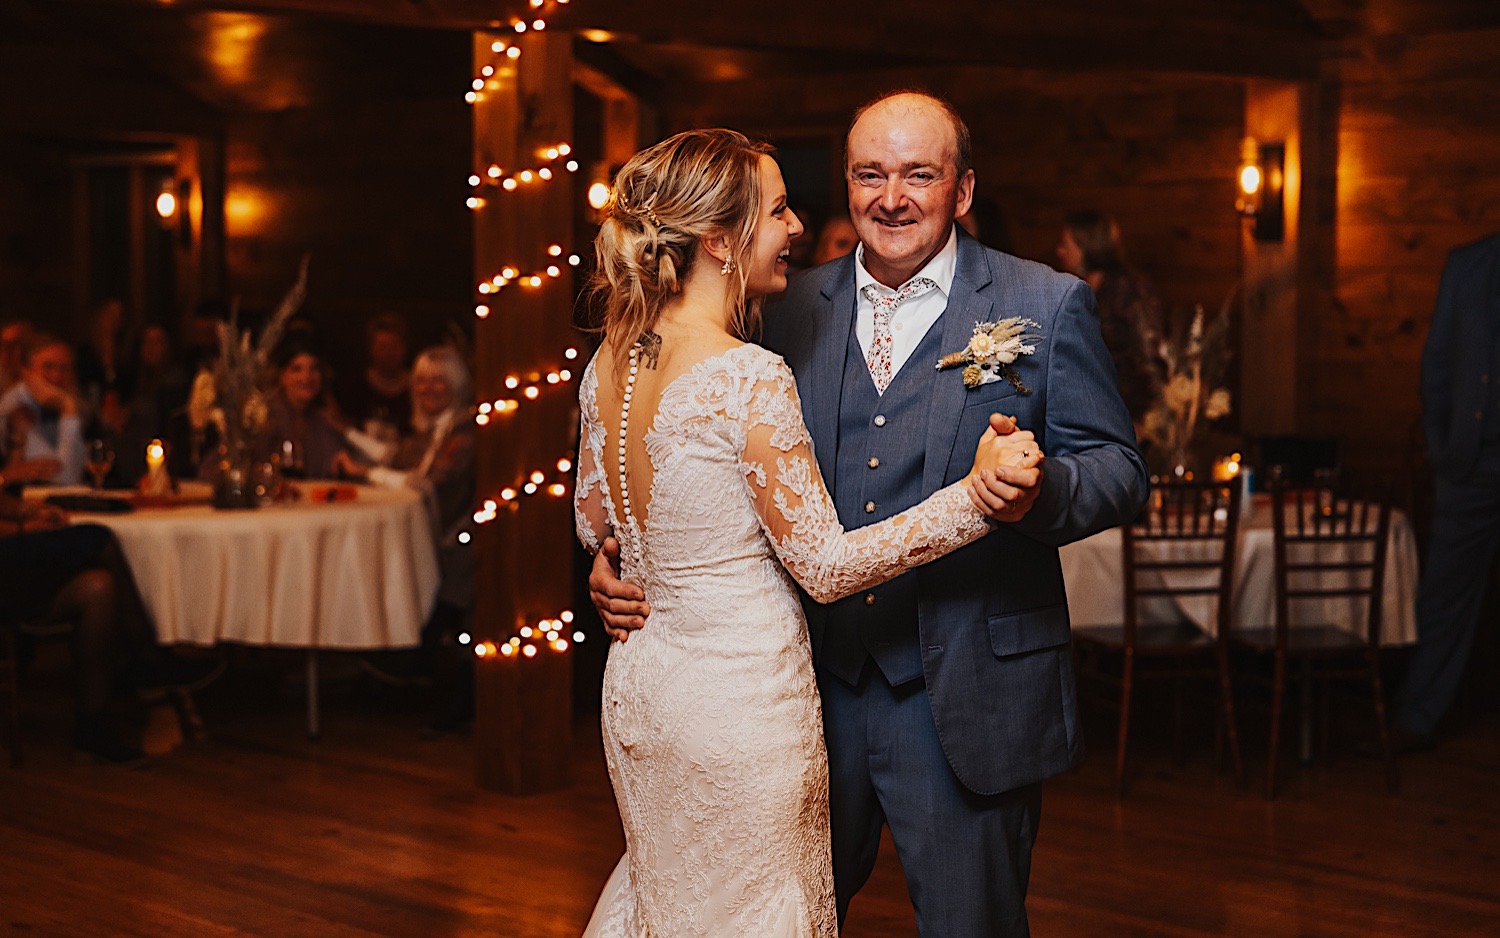 A bride and her father share their first dance together during the bride's indoor wedding reception at Lake Bomoseen Lodge in Vermont